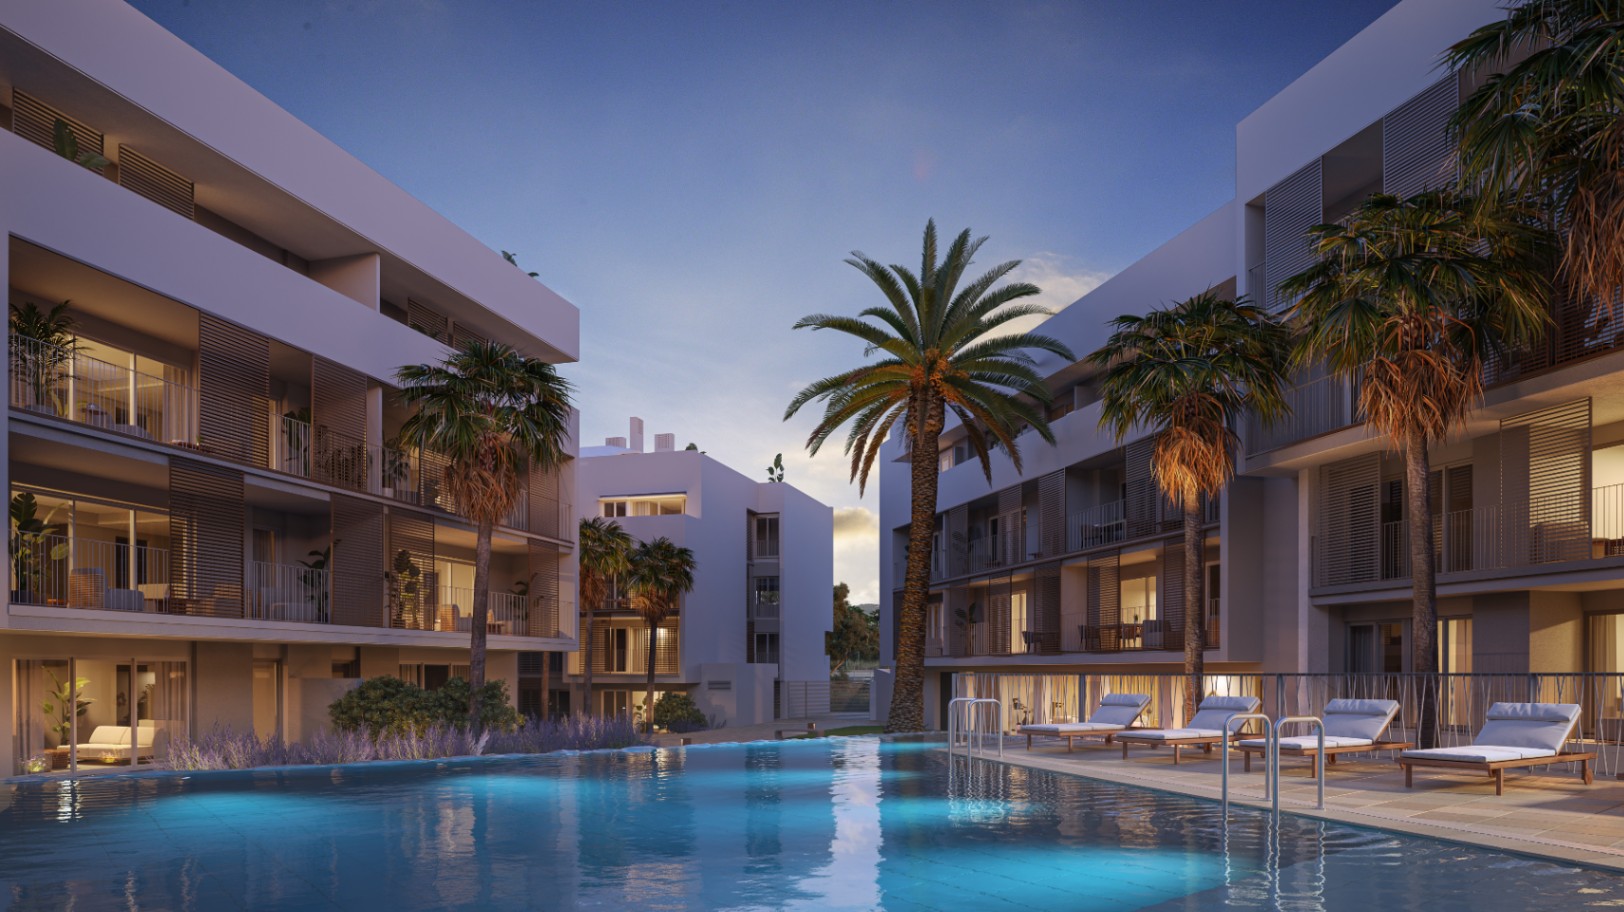 Javea: Beautiful newly built apartment within walking distance of the sea